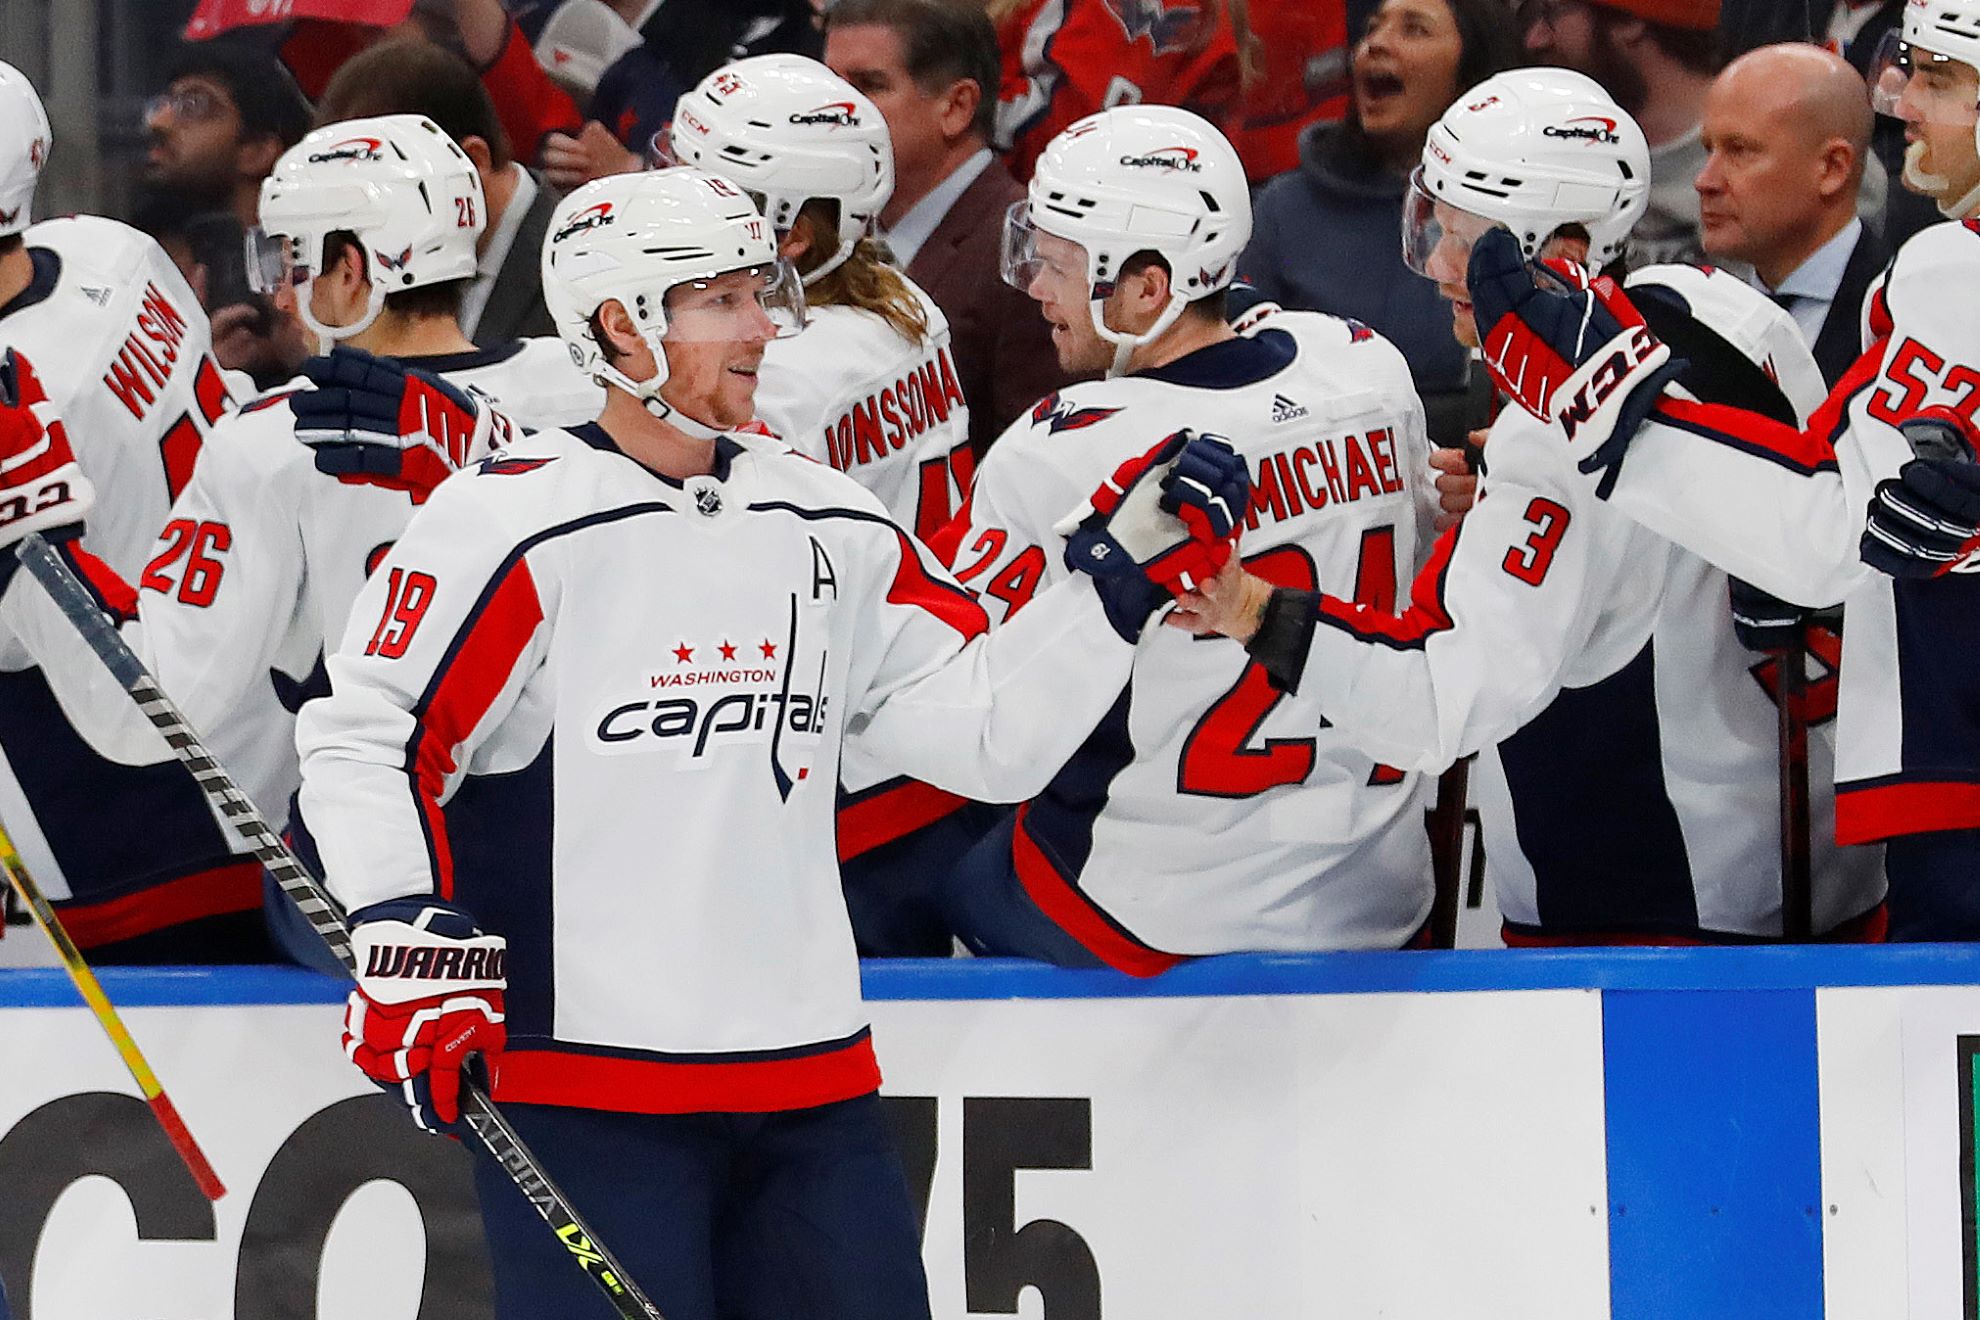 Alex Ovechkin tallies 1,000th point after scoring in game's first minute!